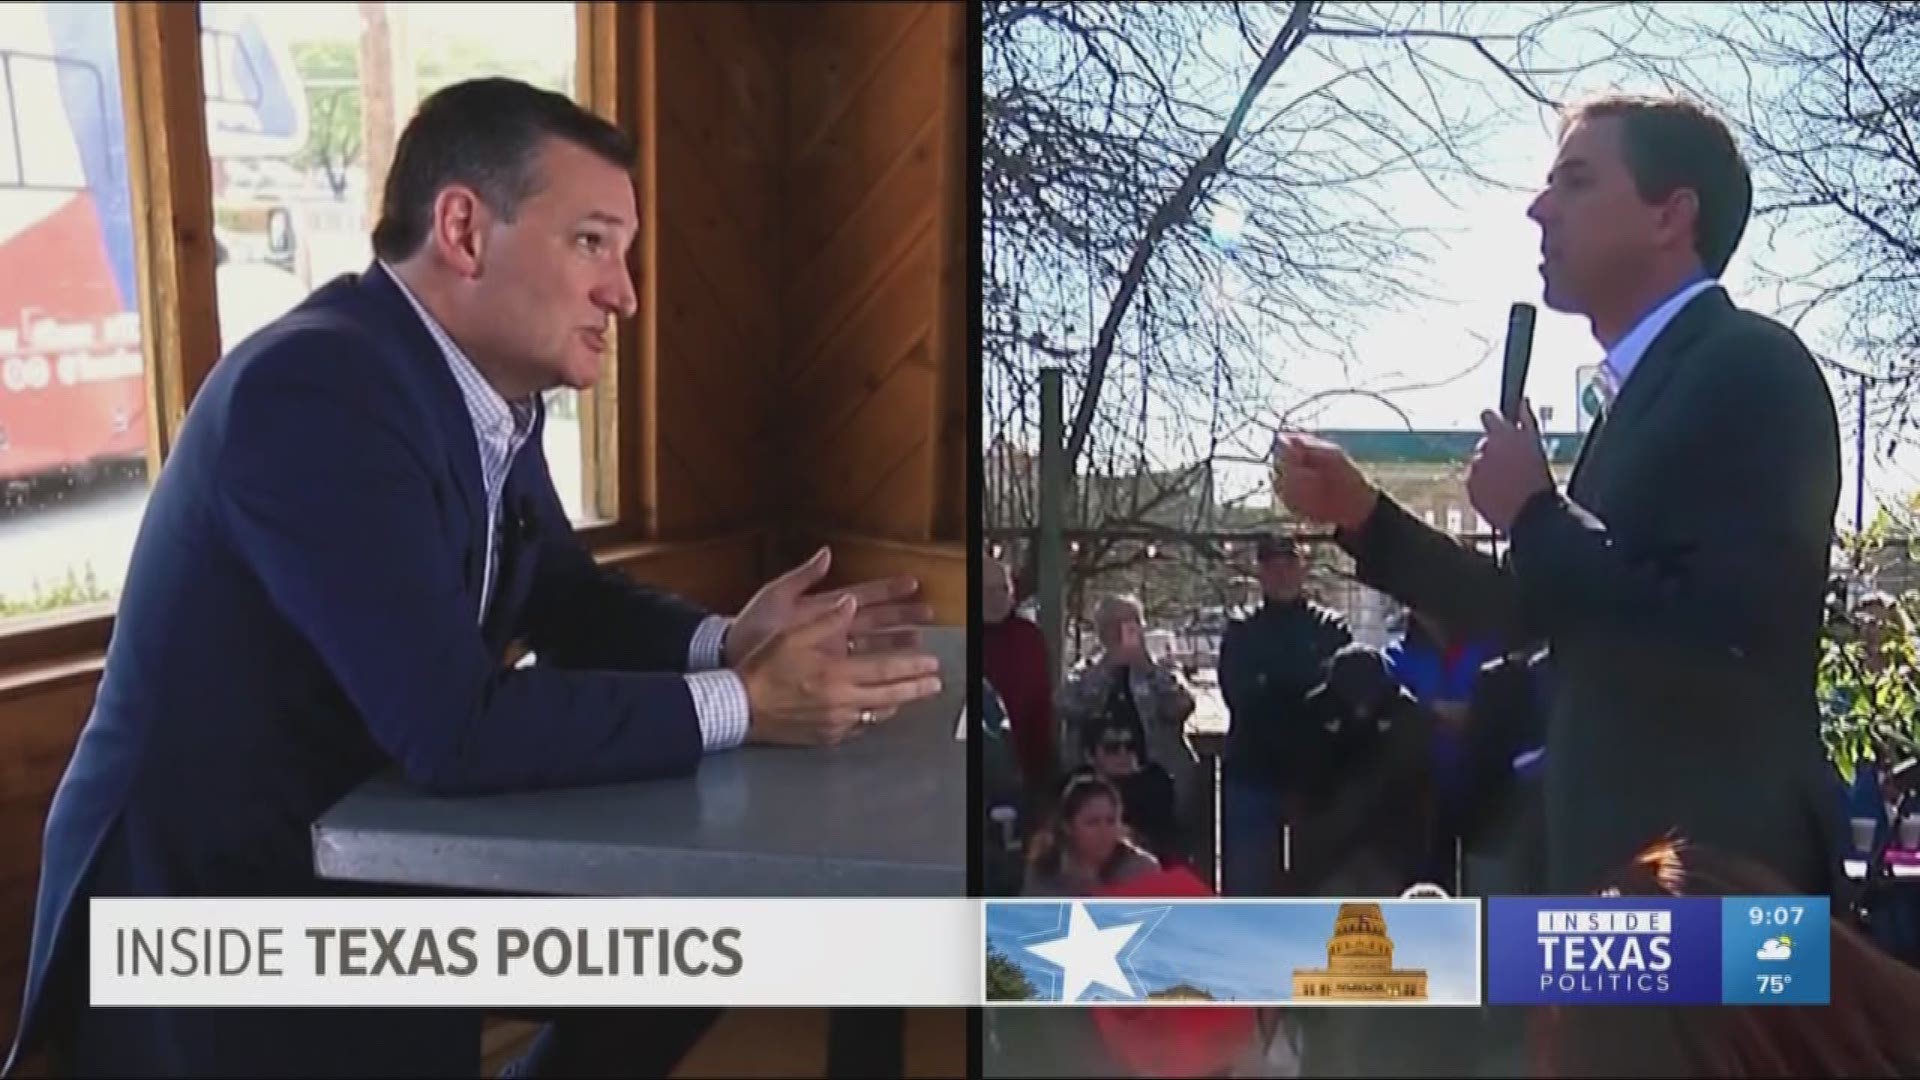 Polls from last week show the Senate race between Ted Cruz and Beto O'Rourke tightening. Cruz now holds a single-digit lead. He has asked President Trump to come campaign for him. 